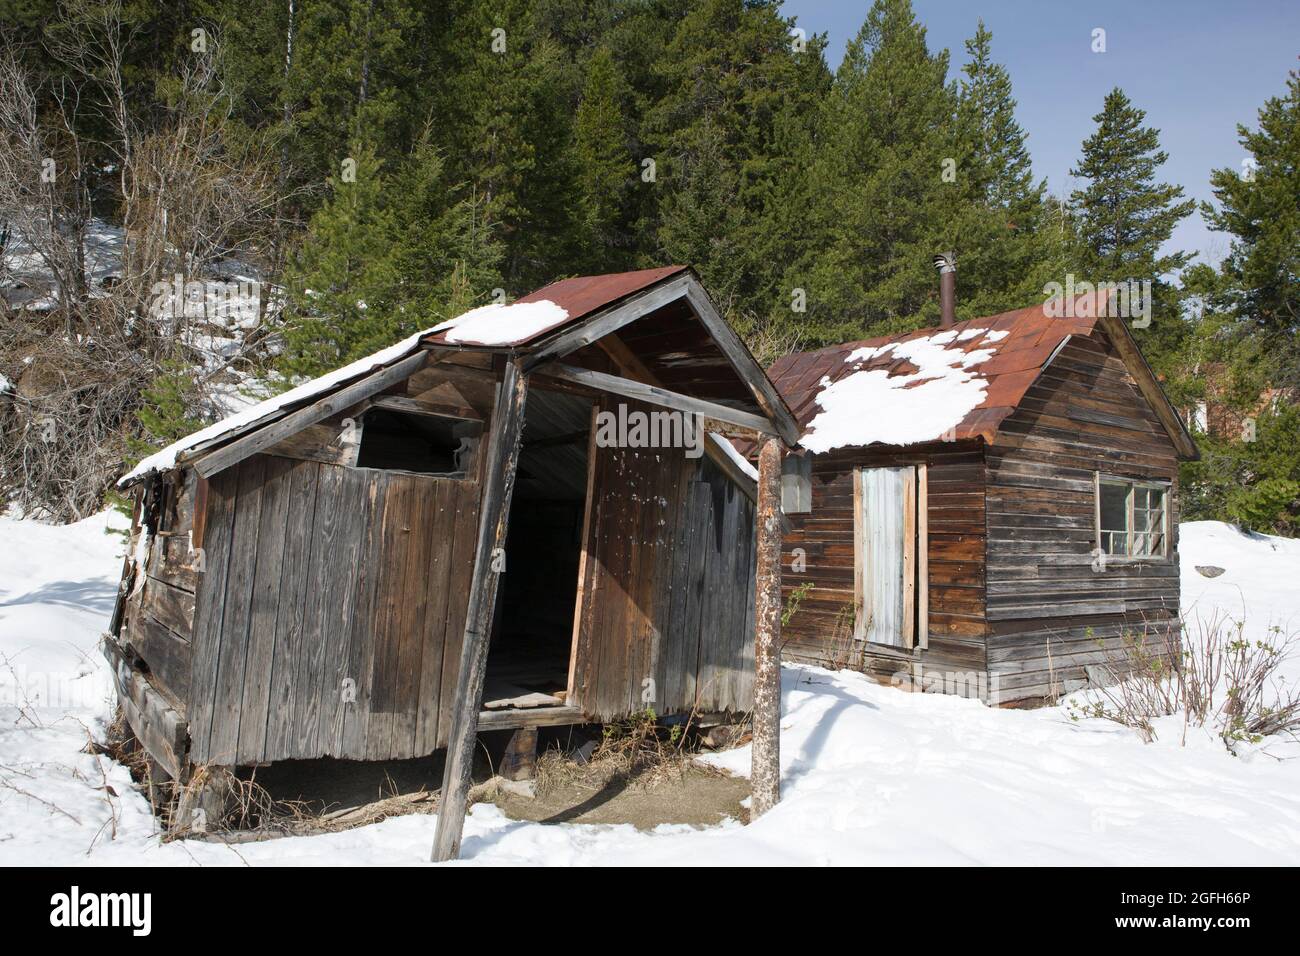 Dilapidated wooden miner's cabins showing their age, Granite Ghost Town State Park, MT. Stock Photo